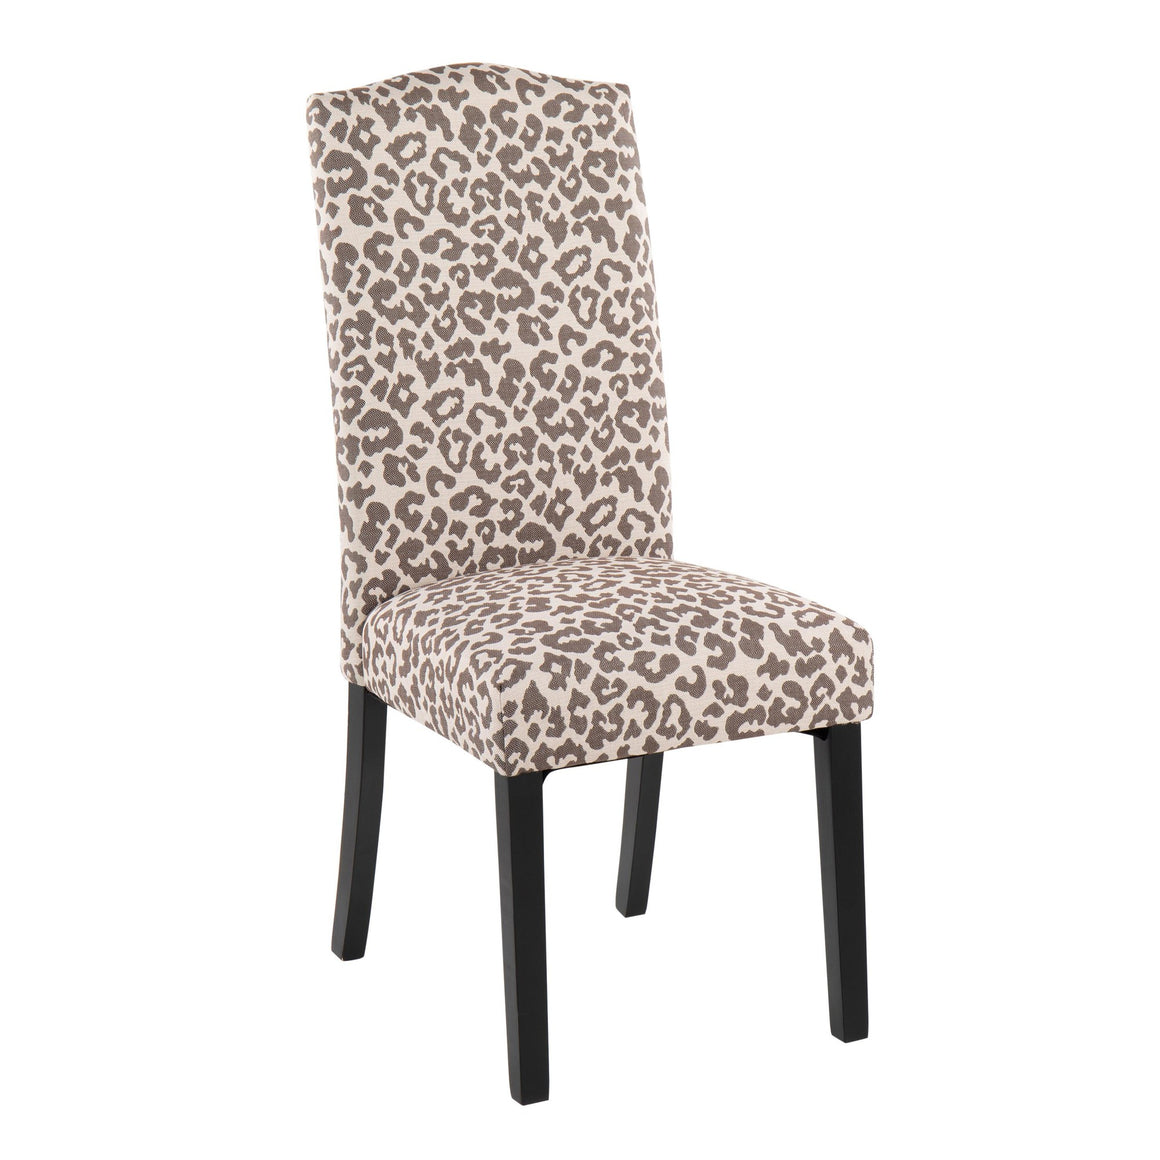 Leopard Contemporary Dining Chair in Black Wood and Beige Leopard Print Fabric by LumiSource